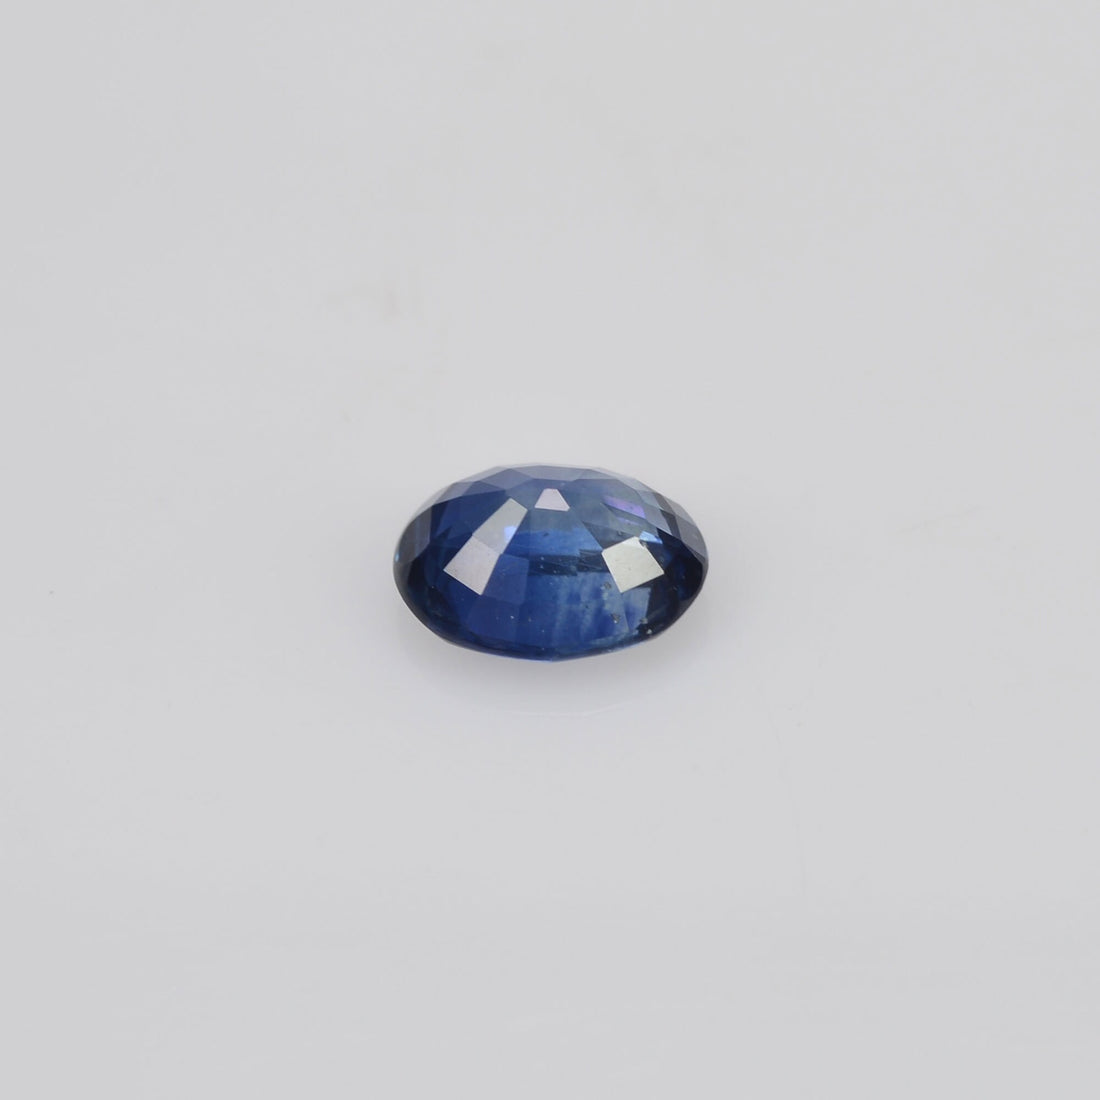 0.73 cts Natural Blue Sapphire Loose Gemstone Oval Cut